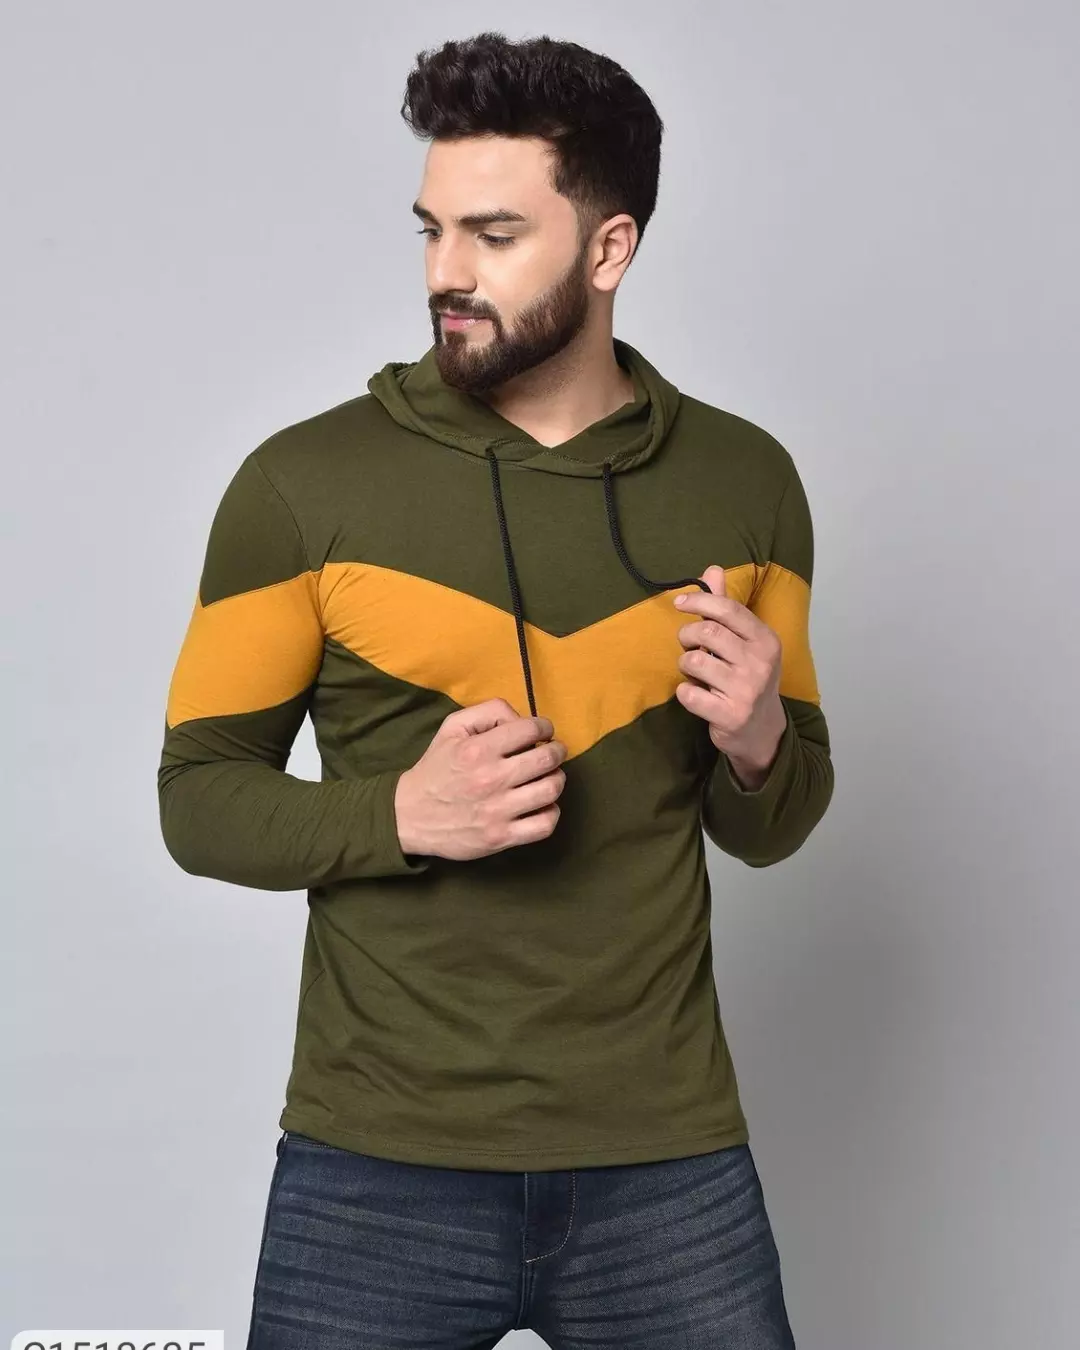 Post image *Product Name:* Cotton Blend Color Block Full Sleeves Hoodie T-Shirt
*Details:*Description: It has 1 Piece of Mens Hoodie T-ShirtMaterial: Cotton BlendSize Chest Measurements (In Inches): S-38, M-40, L-42, XL-44Sleeve: Full SleevesWork: Color BlockLength (in Inches): S-27, M-27.5, L-28, XL-28.5Color : Green
💥 *FREE Shipping* 💥 *FREE COD* 💥 *FREE Return &amp; 100% Refund* 🚚 *Delivery*: Within 6 days 